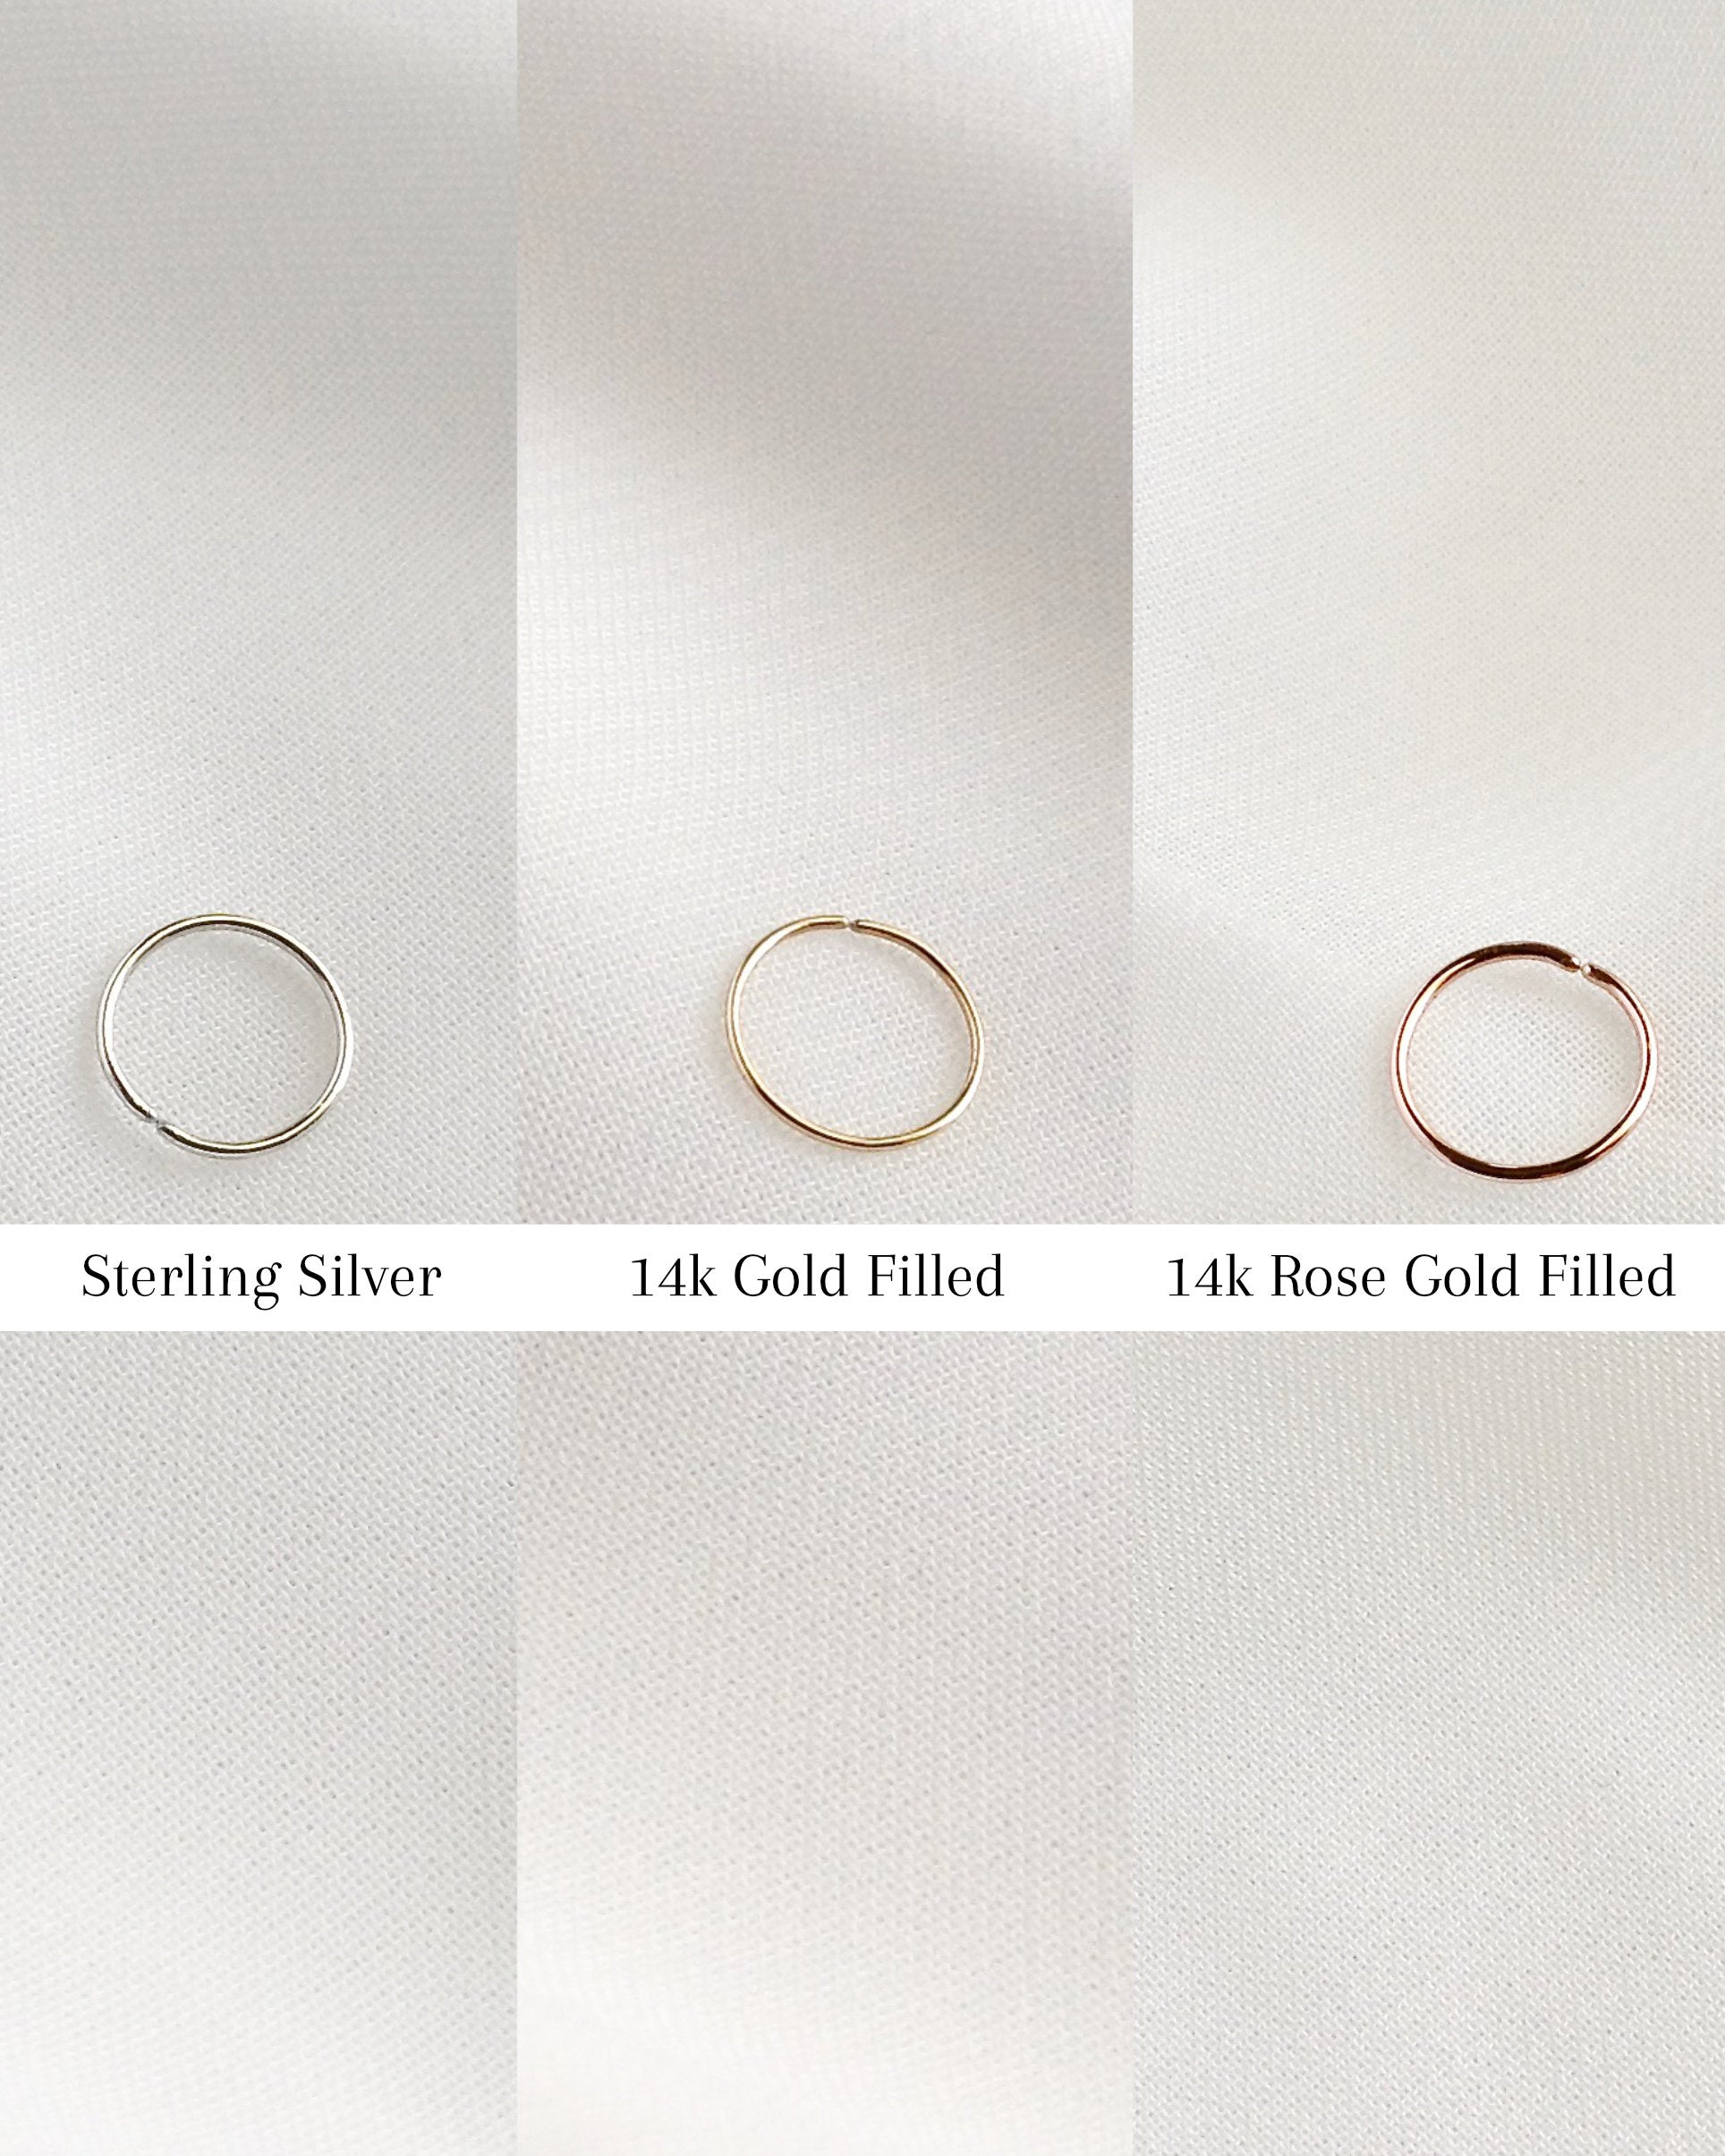 Thin Nose Hoops | Sterling Silver 14k Gold Filled and 14k Rose Gold Filled